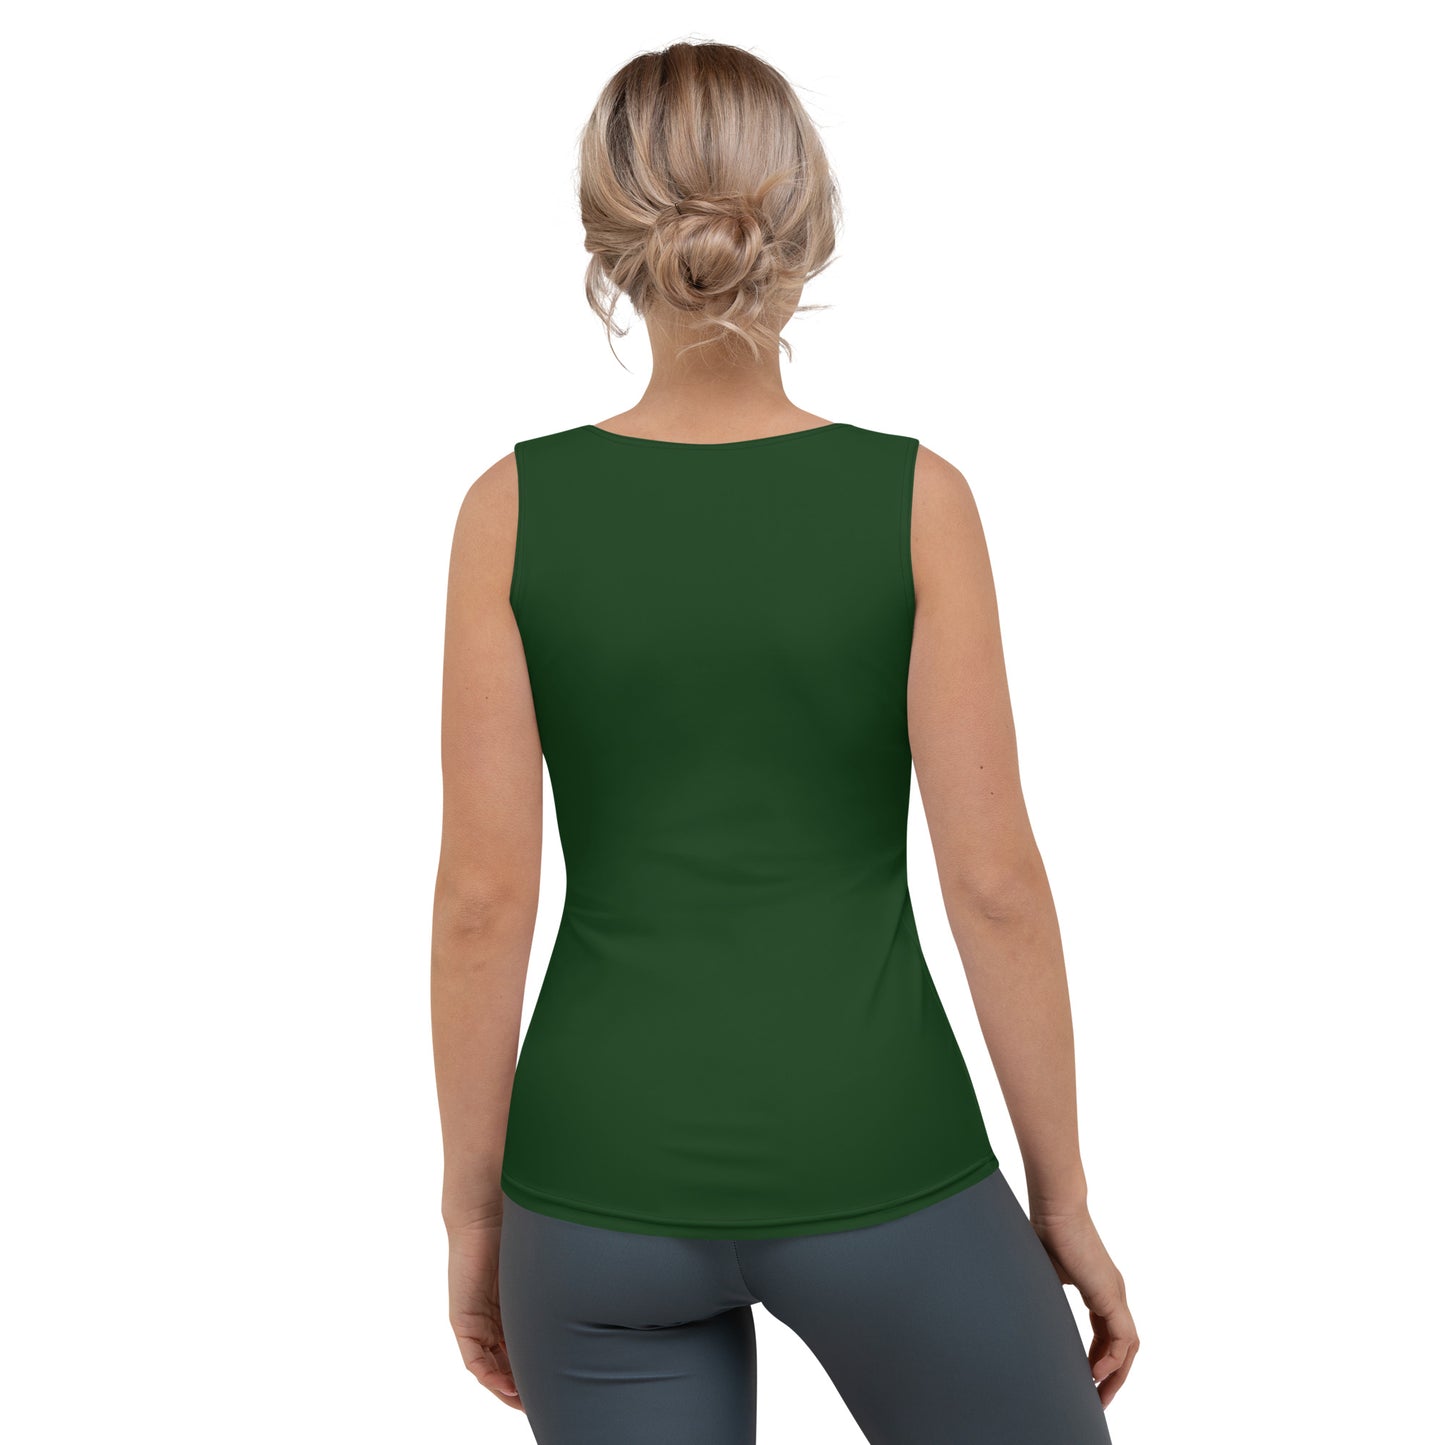 Forest Tank Top